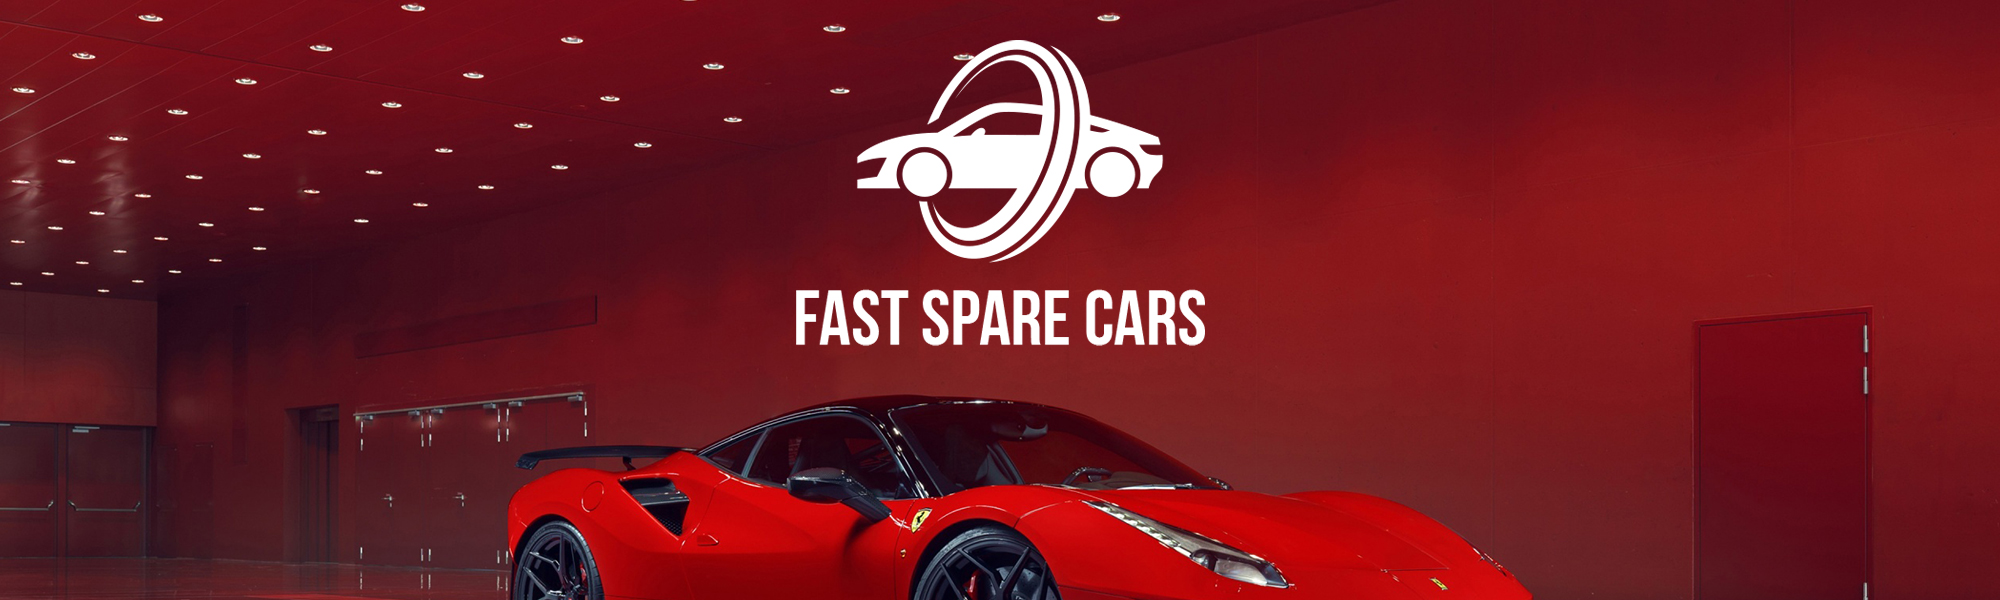 Fast Spare Cars